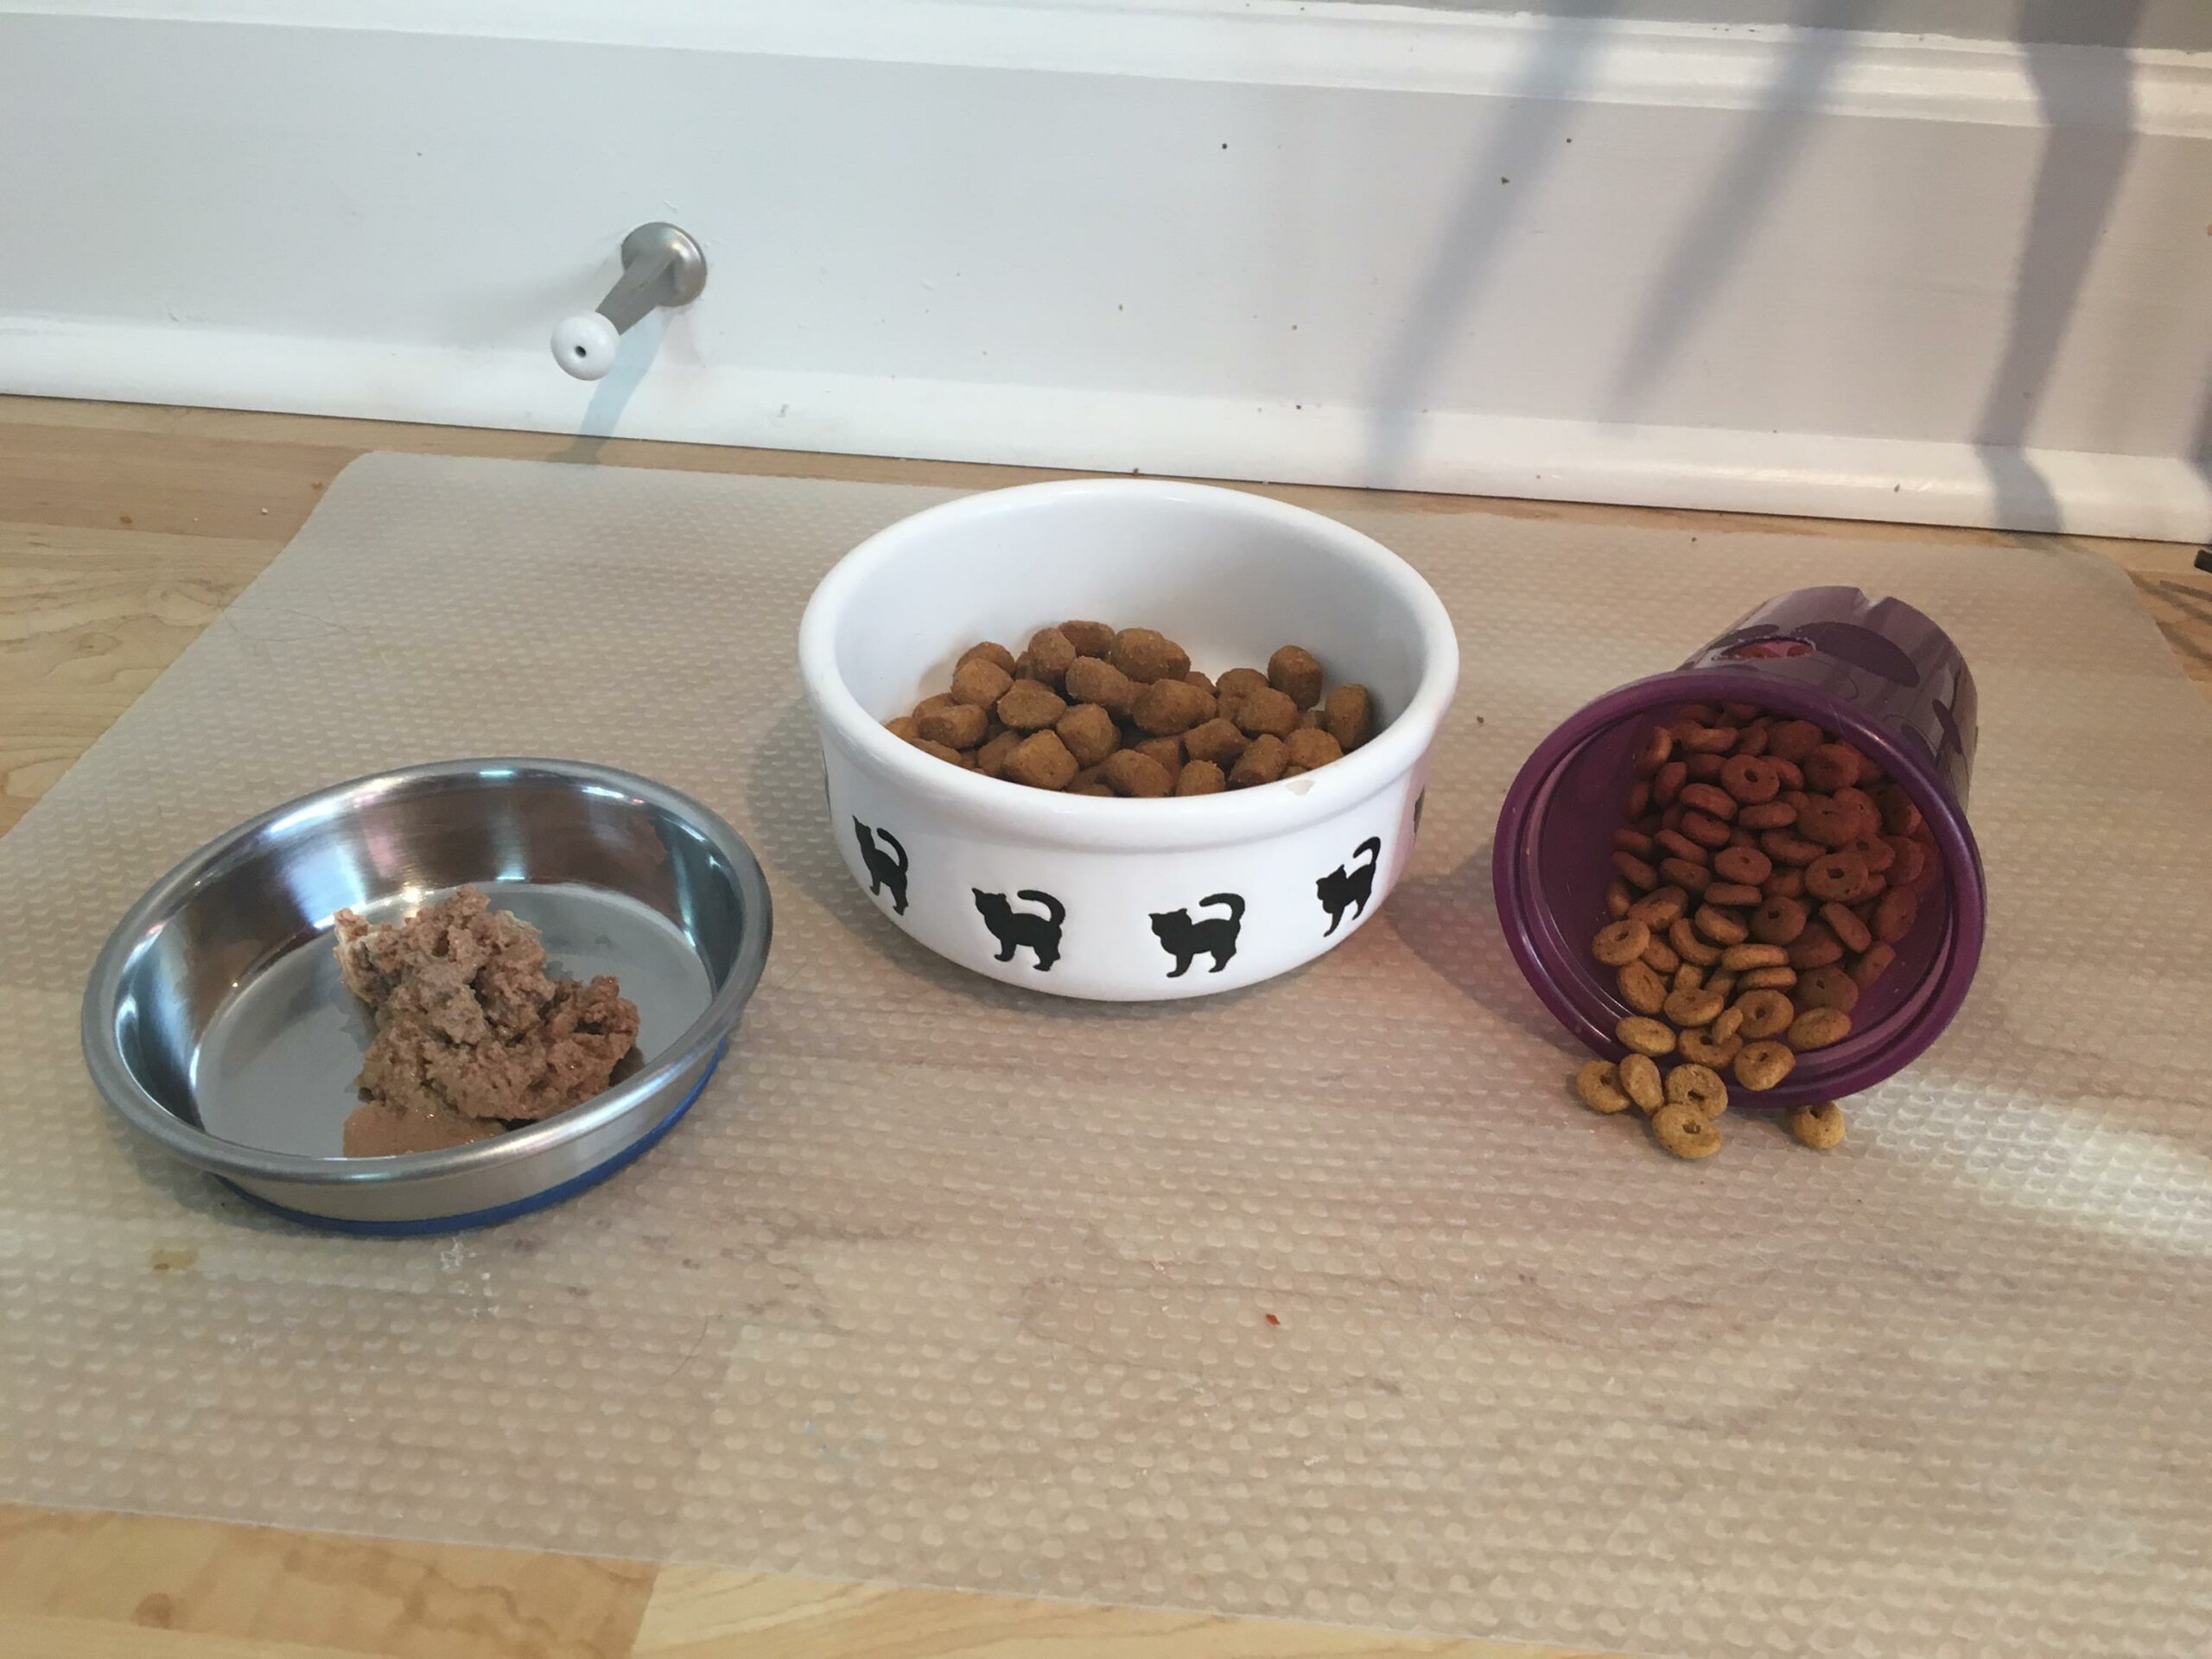 Attempting to offer wet food and an easy foraging cup-open!